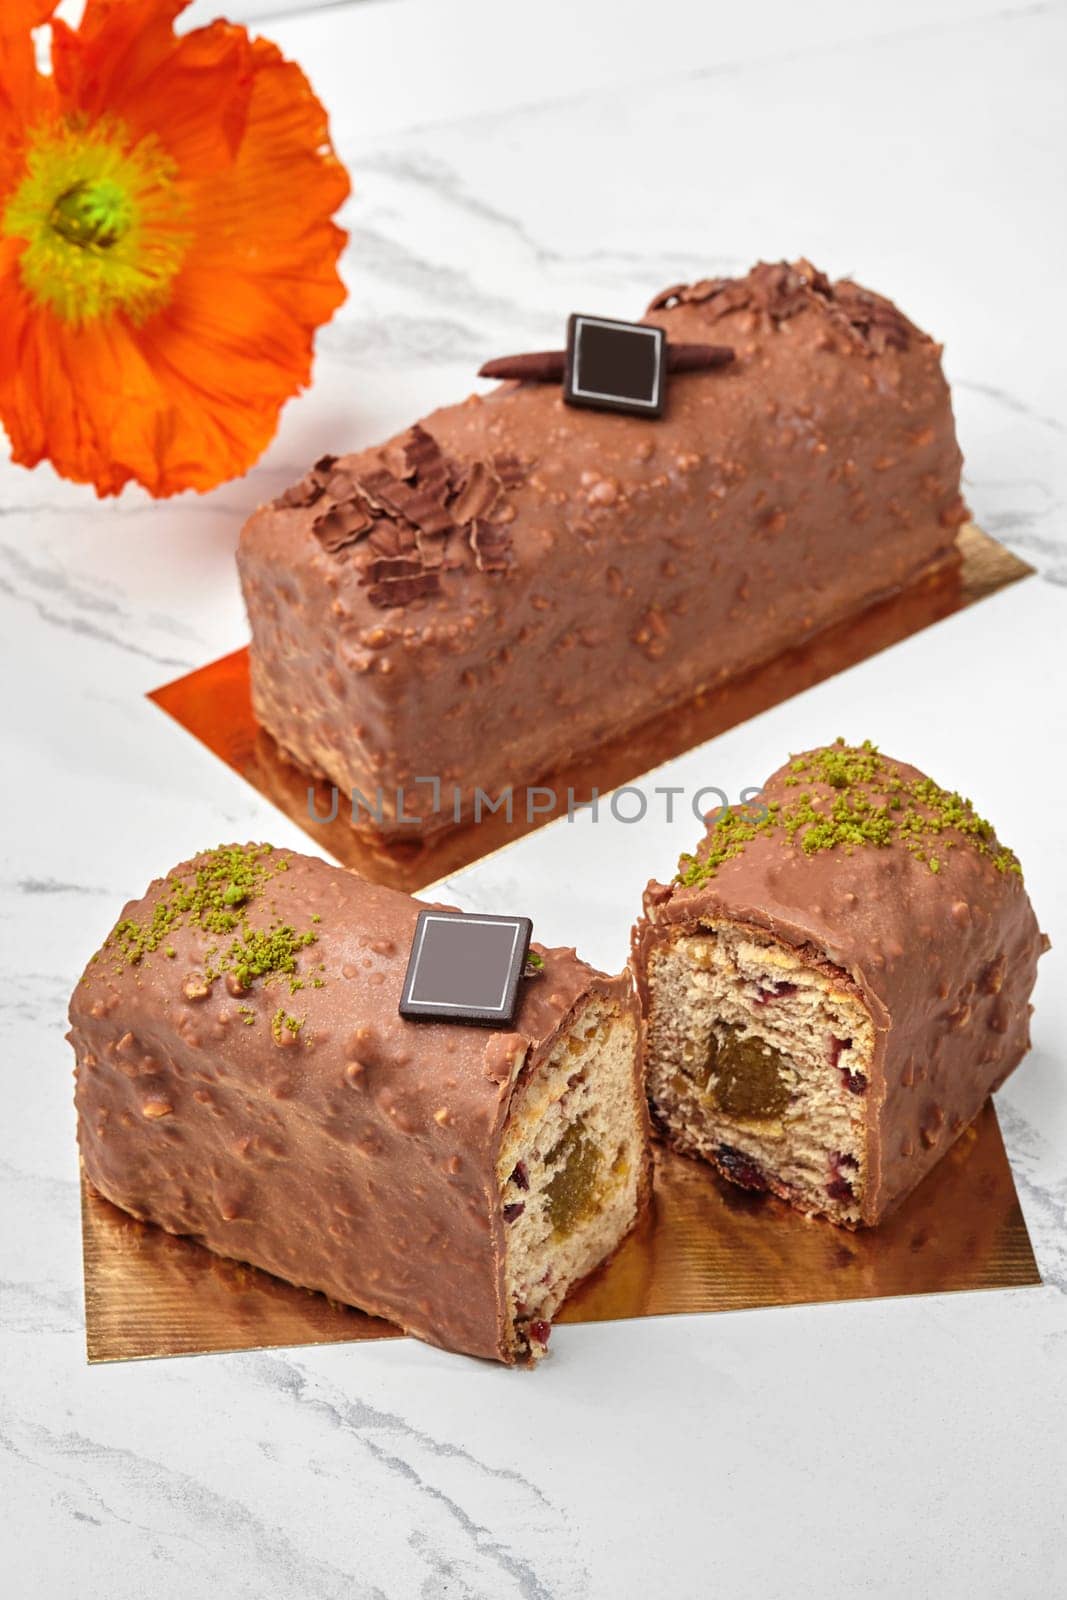 Handcrafted chocolate glazed loaf cake with fruit filling, berries and nuts, sprinkled with pistachio crumbs for delicious snacking, presented on marble surface with vibrant orange poppy flower